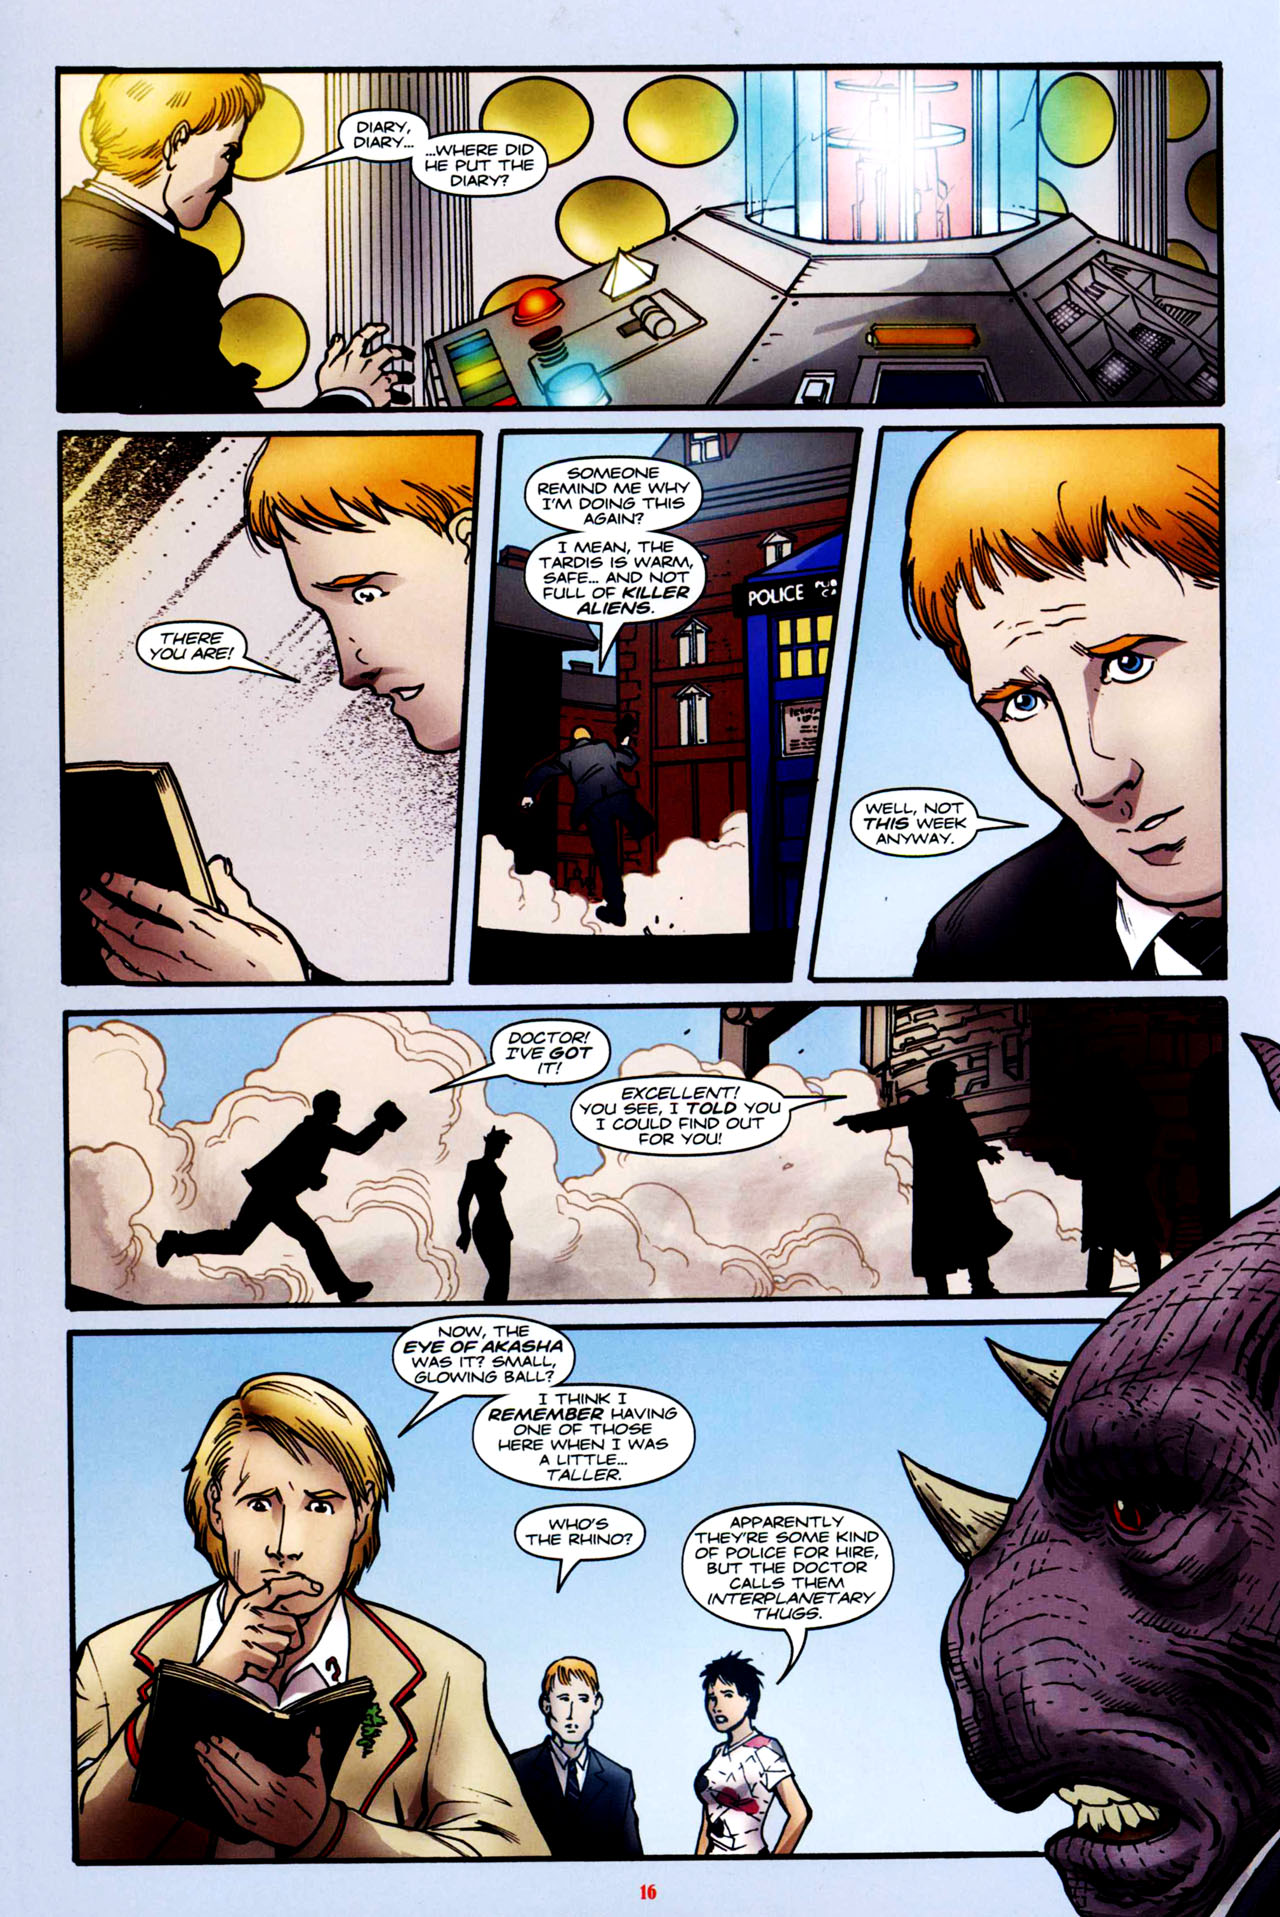 Read online Doctor Who: The Forgotten comic -  Issue #3 - 17